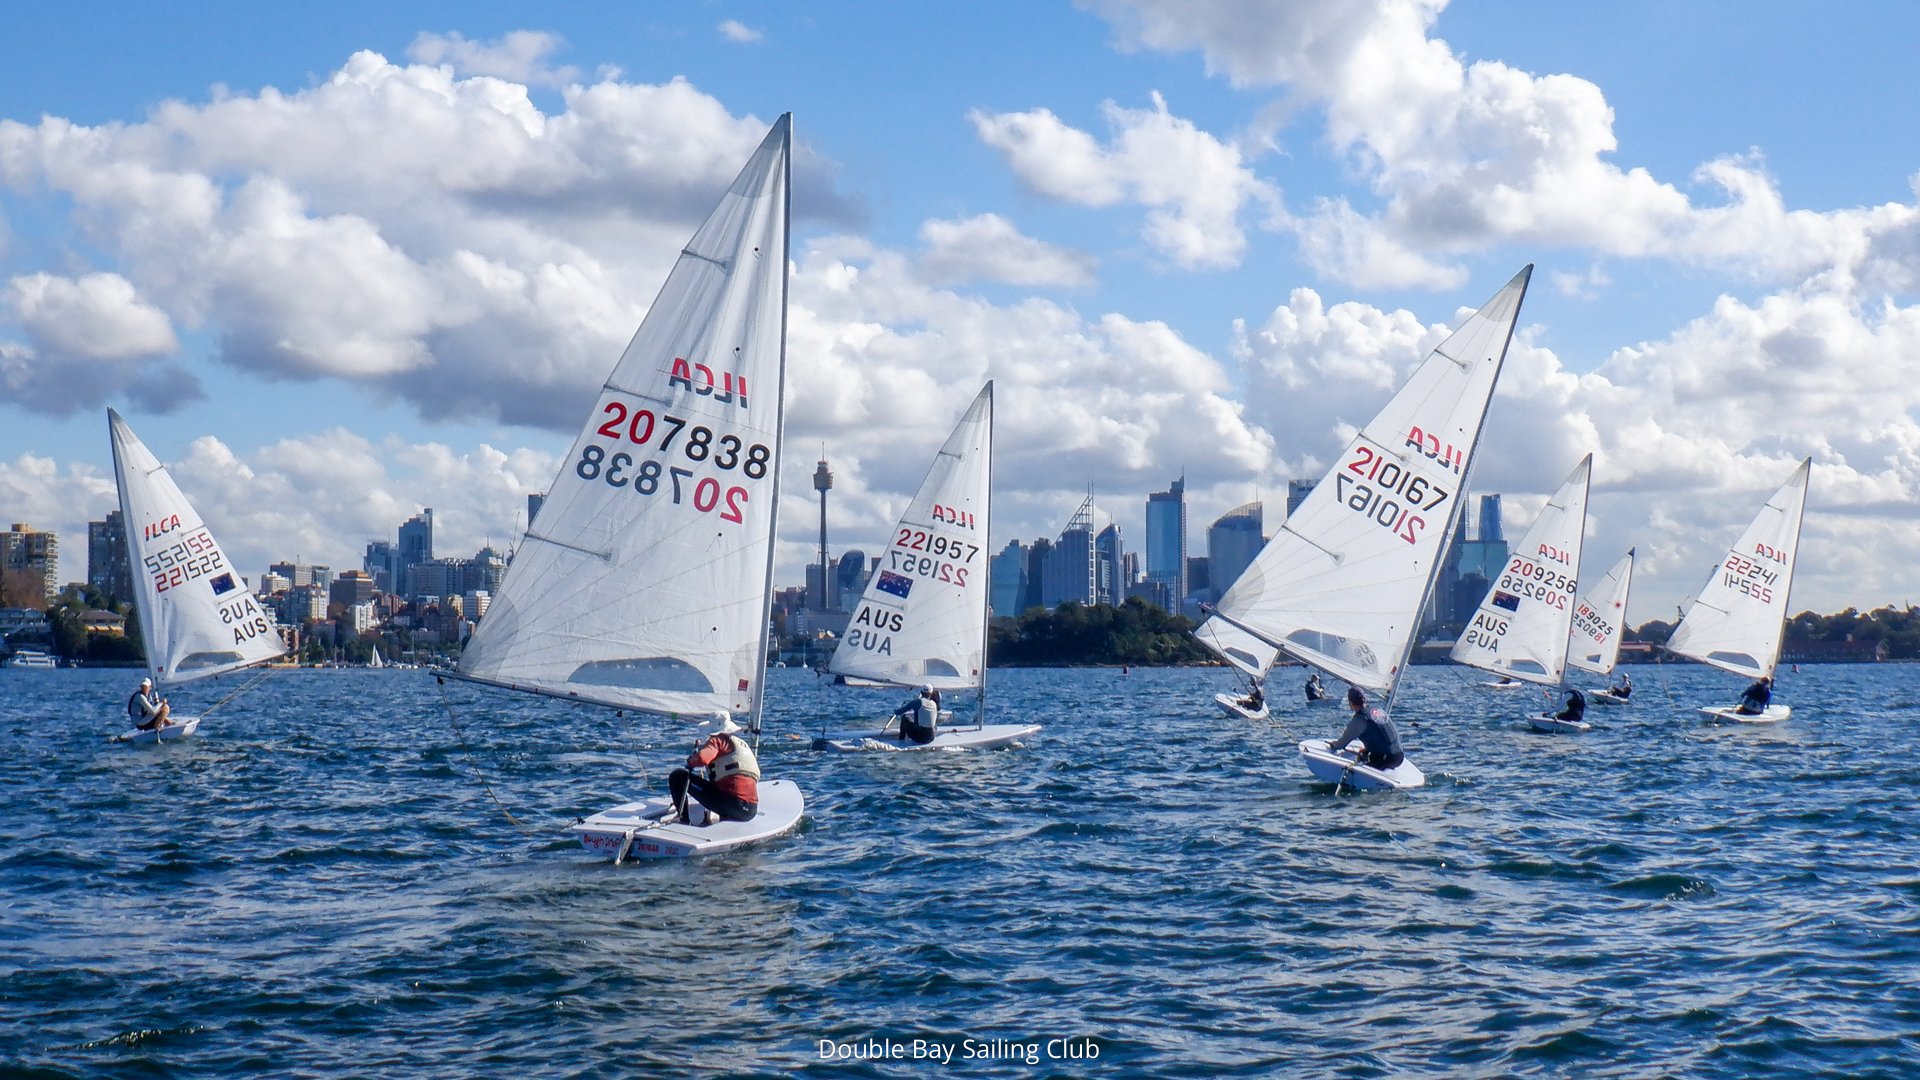 A stunning autumn day for the last race of the autumn season 😎

#lasersailing #laserclass #ilcasailing #ilca #dinghysailing #sailing #doublebaysailingclub #sydneysailing #sydneyharbour #sydney